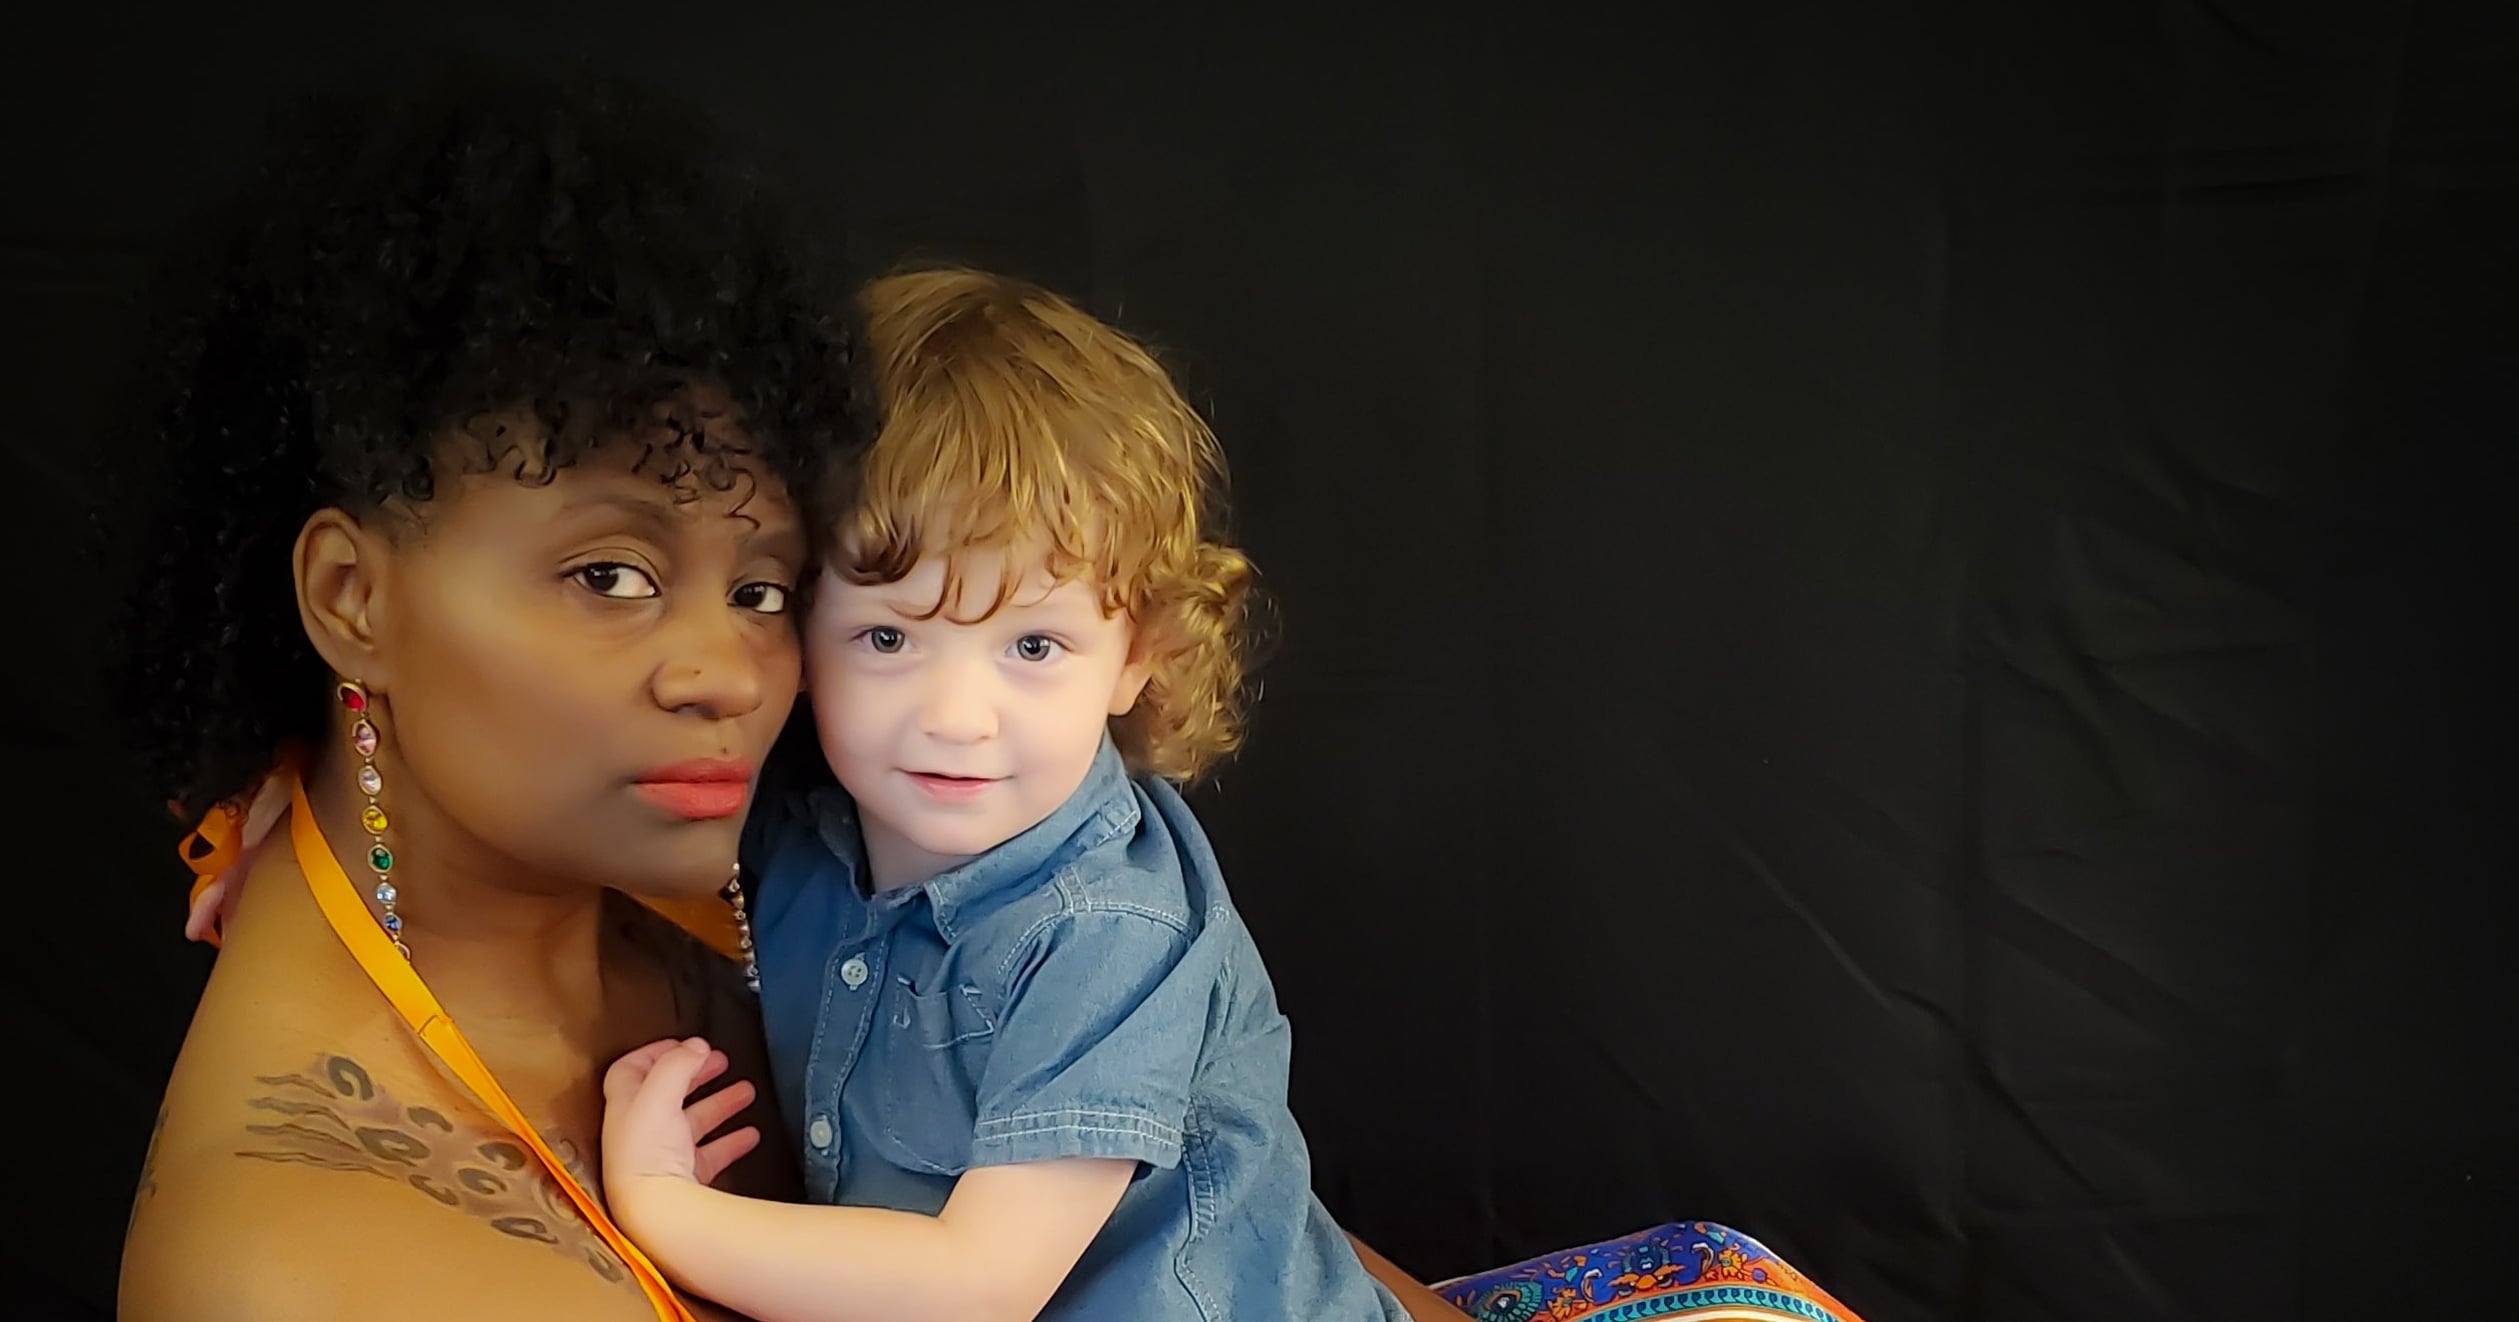 amber cohenour recommends black mom white boy pic